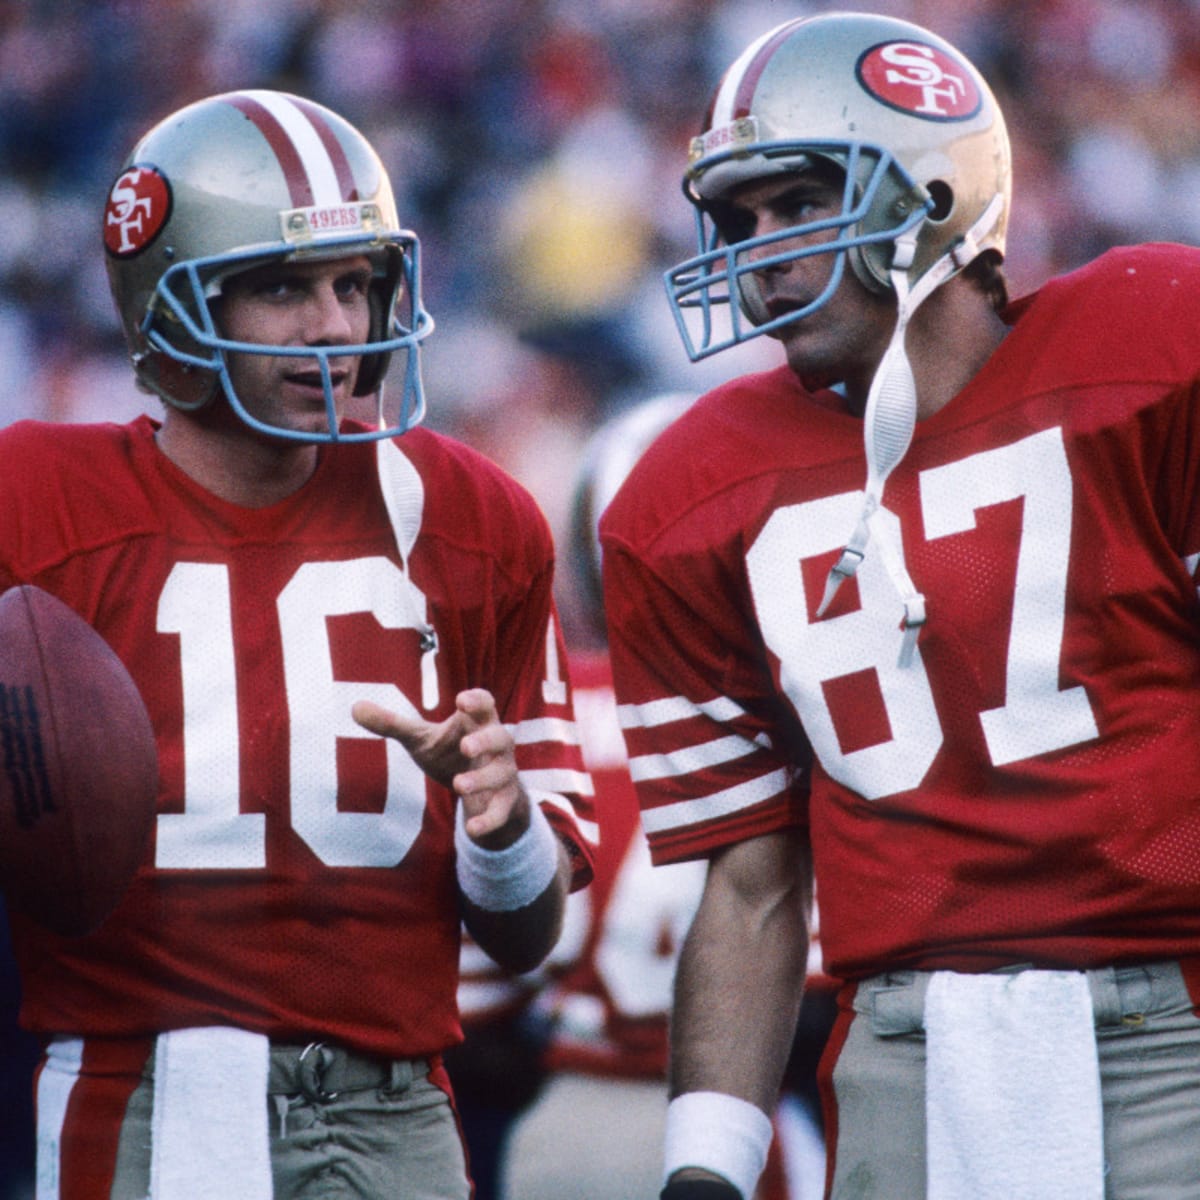 What is ALS? An update on the disease afflicting Dwight Clark